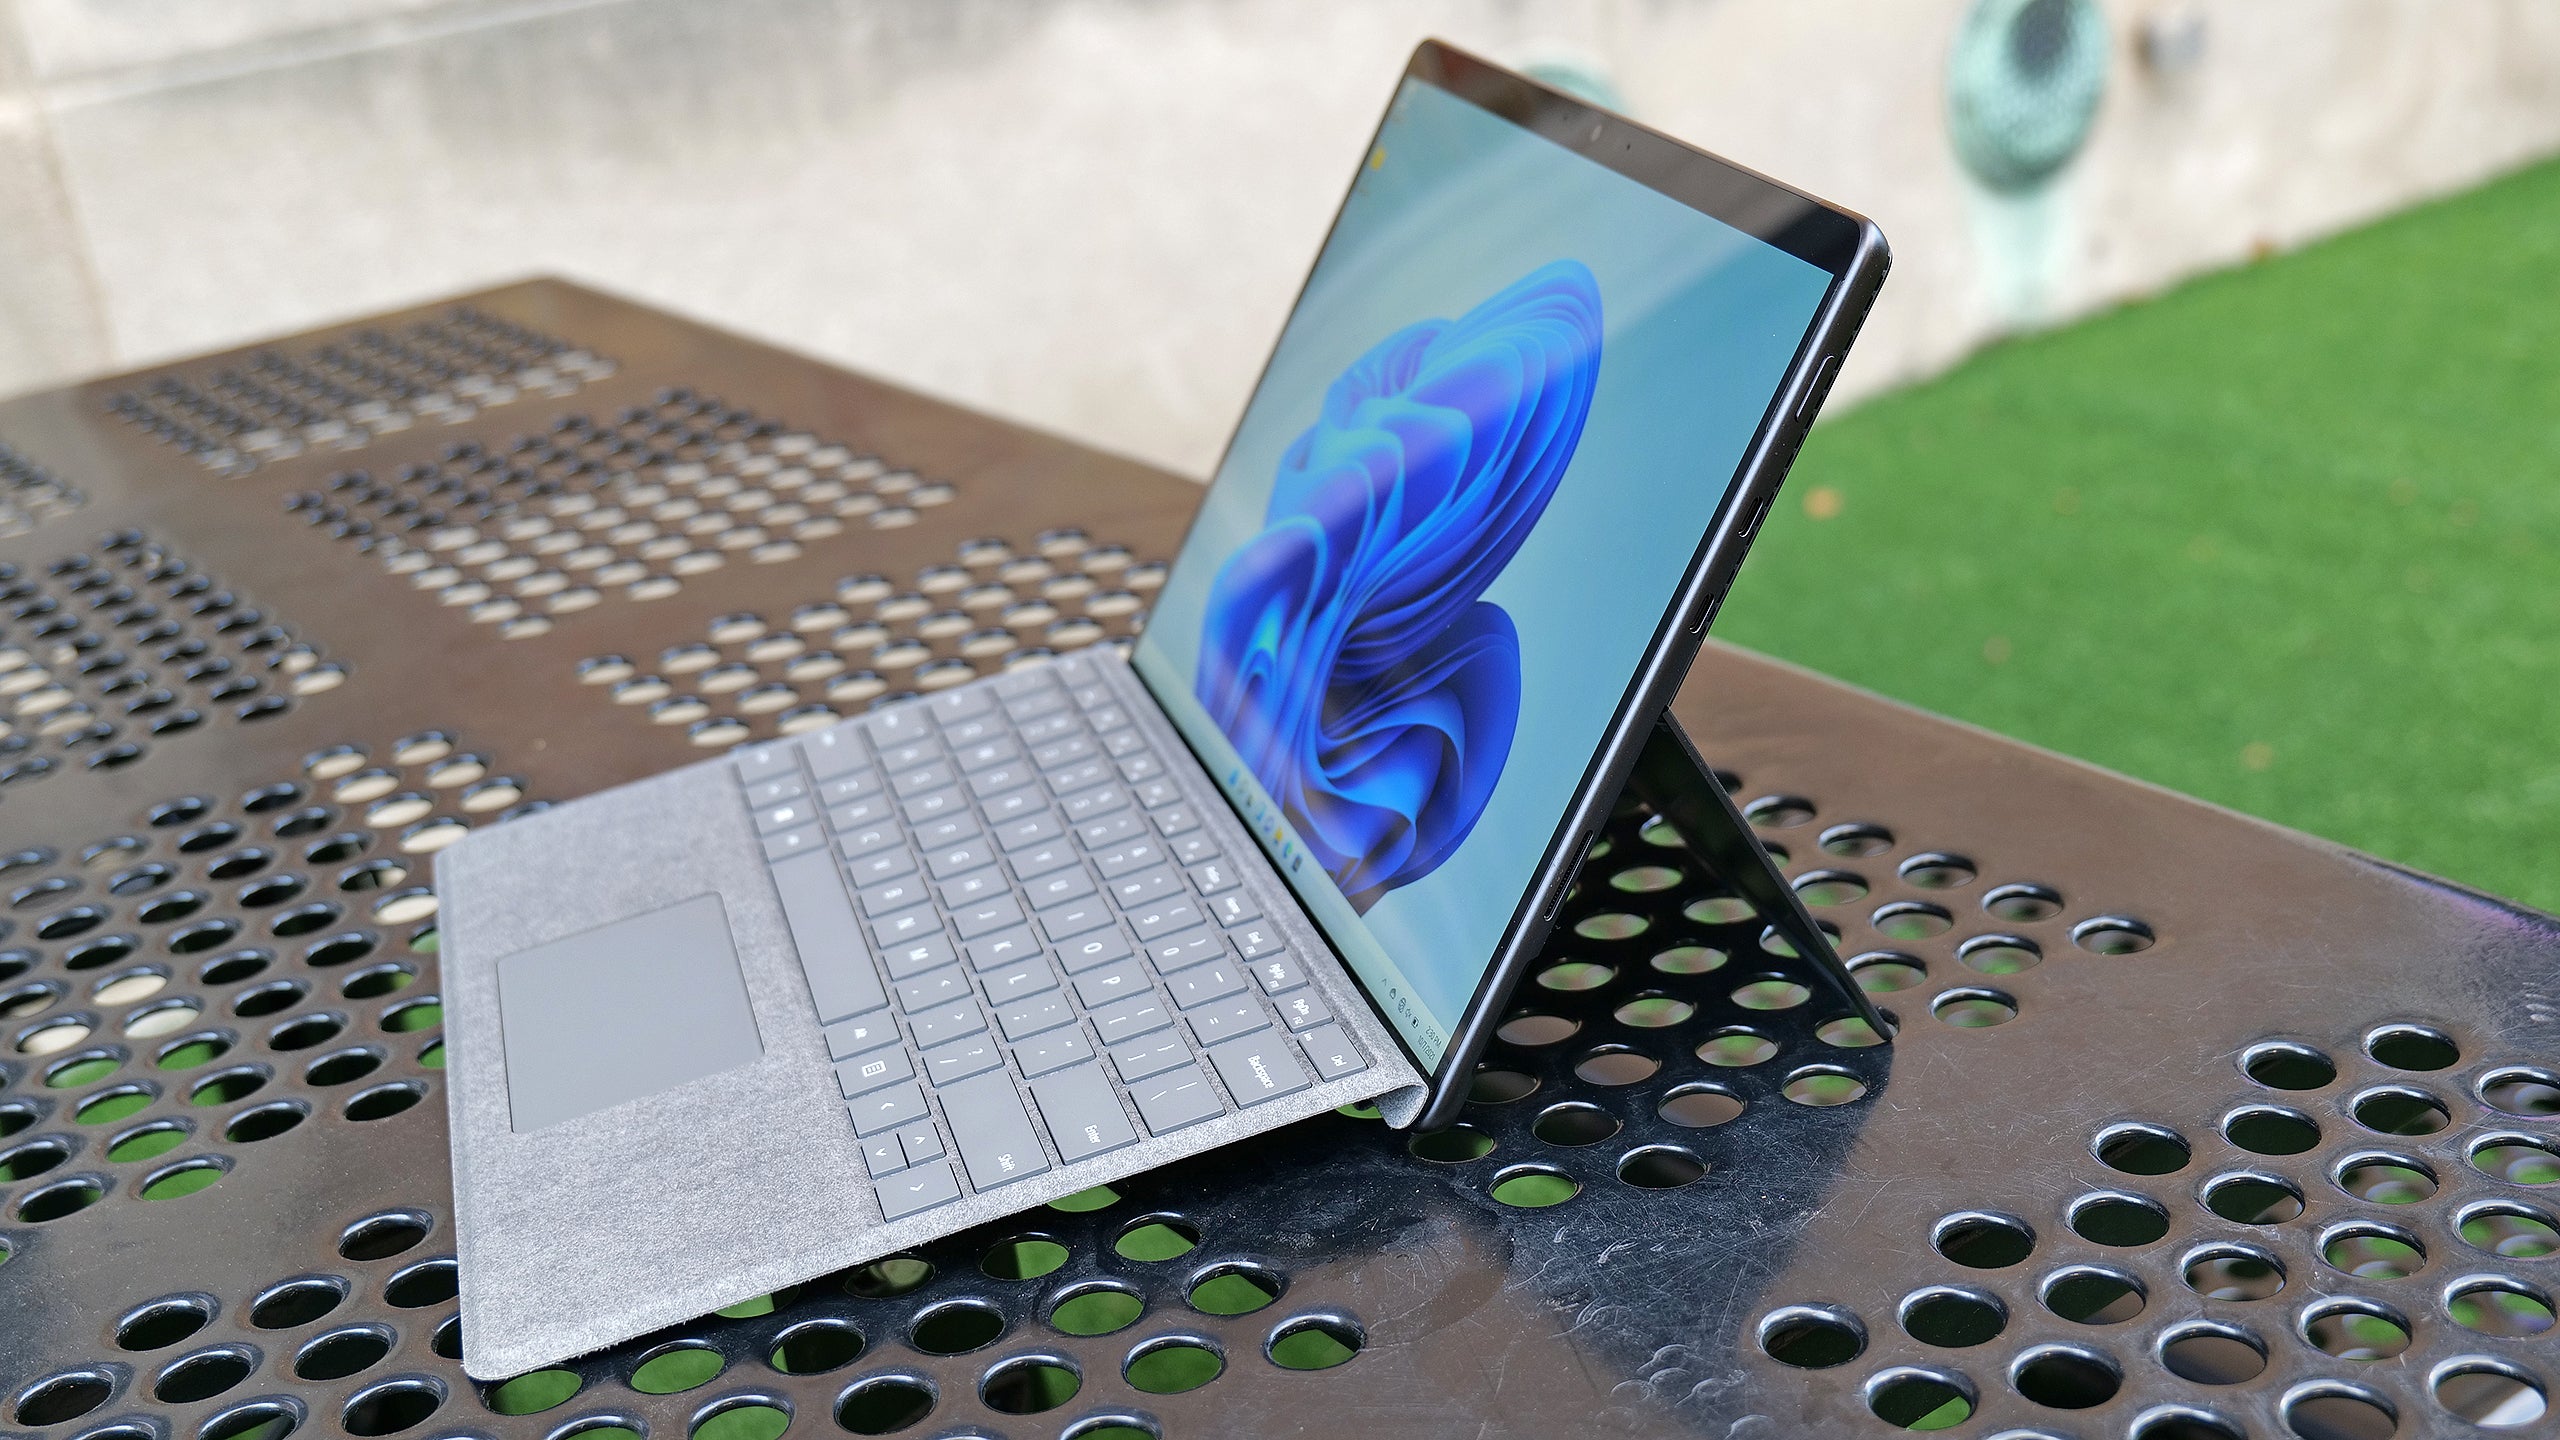 And on the right, you have the two Thunderbolt 3 ports and Microsoft's magnetic Surface Connect port.  (Photo: Sam Rutherford)